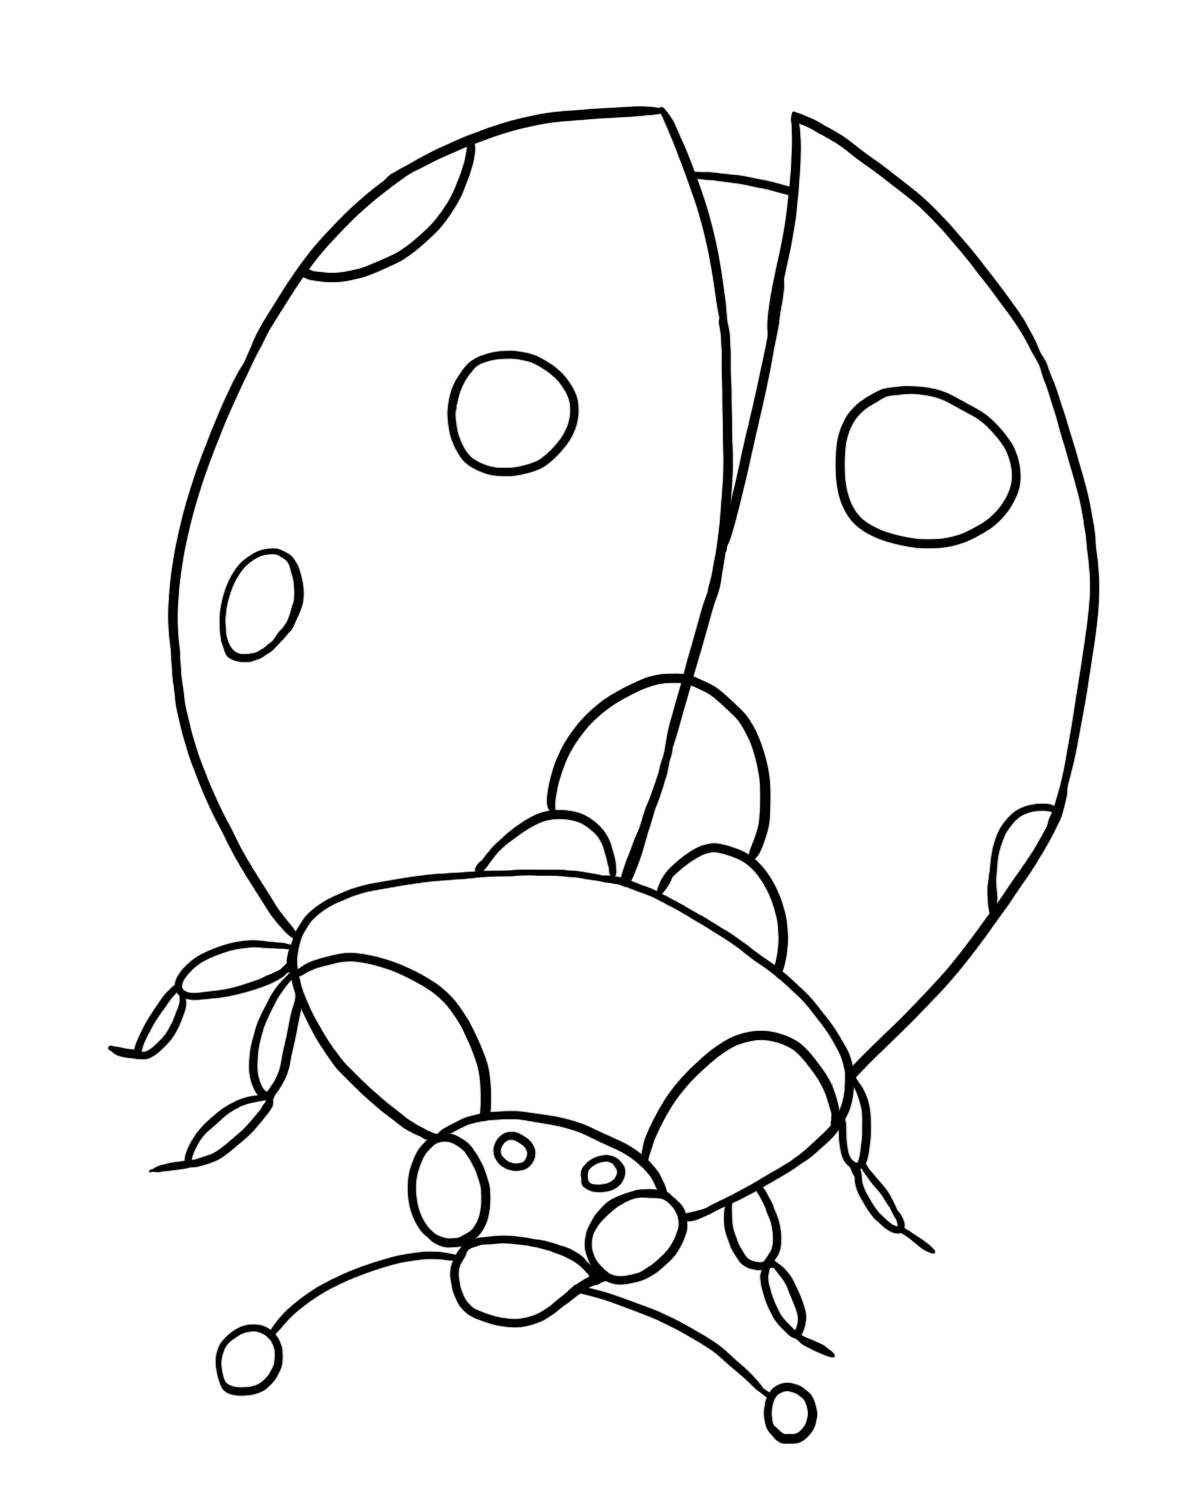 a bugs life coloring pages ladybug - photo #40